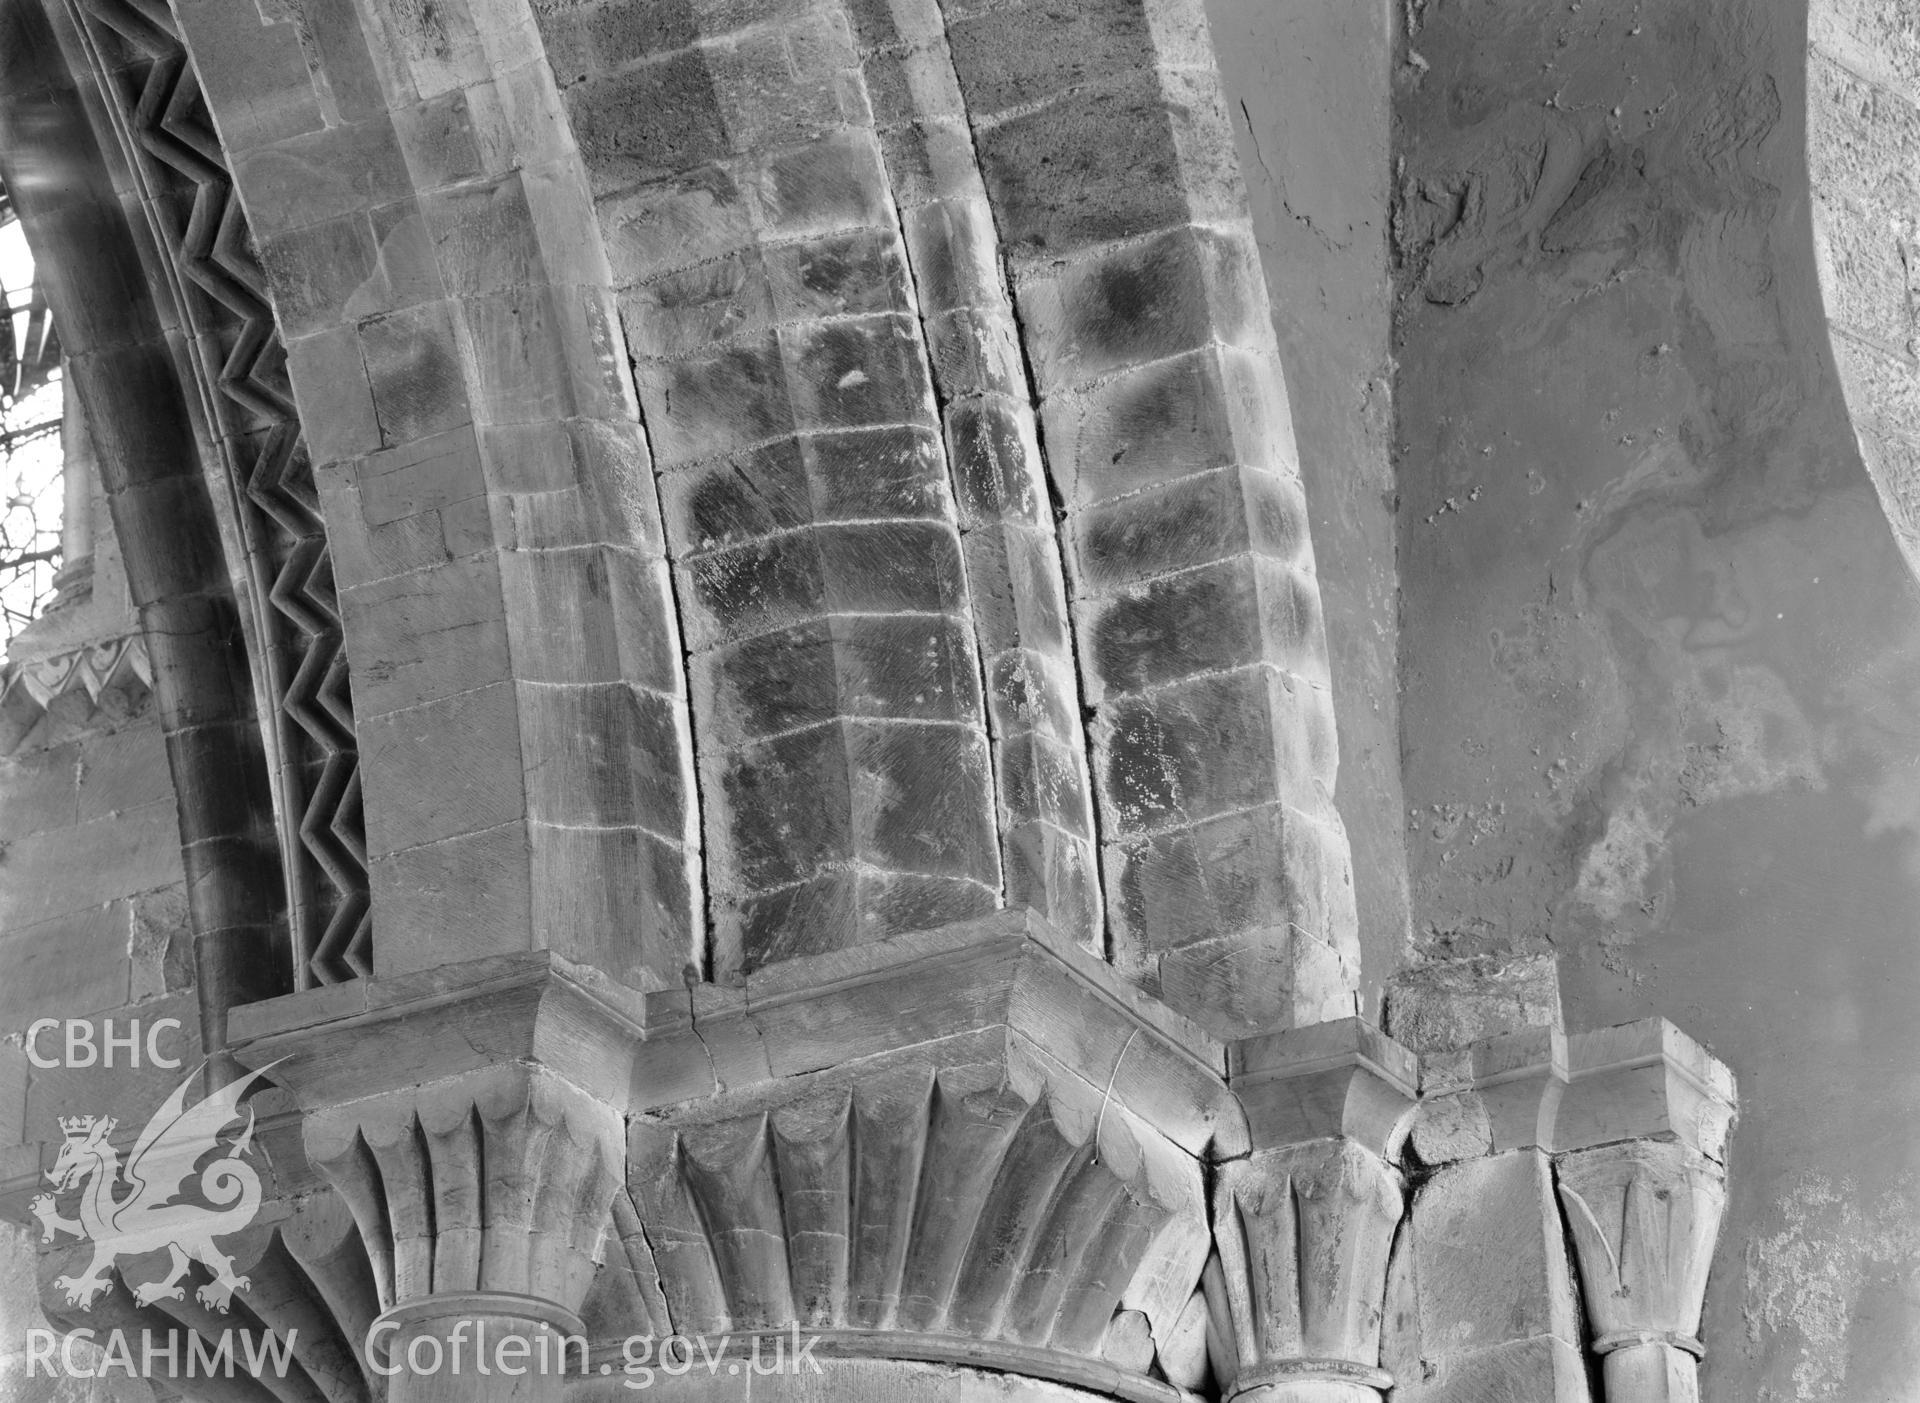 Digital copy of a black and white acetate negative showing detail view of capital at St. David's Cathedral, taken by E.W. Lovegrove, July 1936.